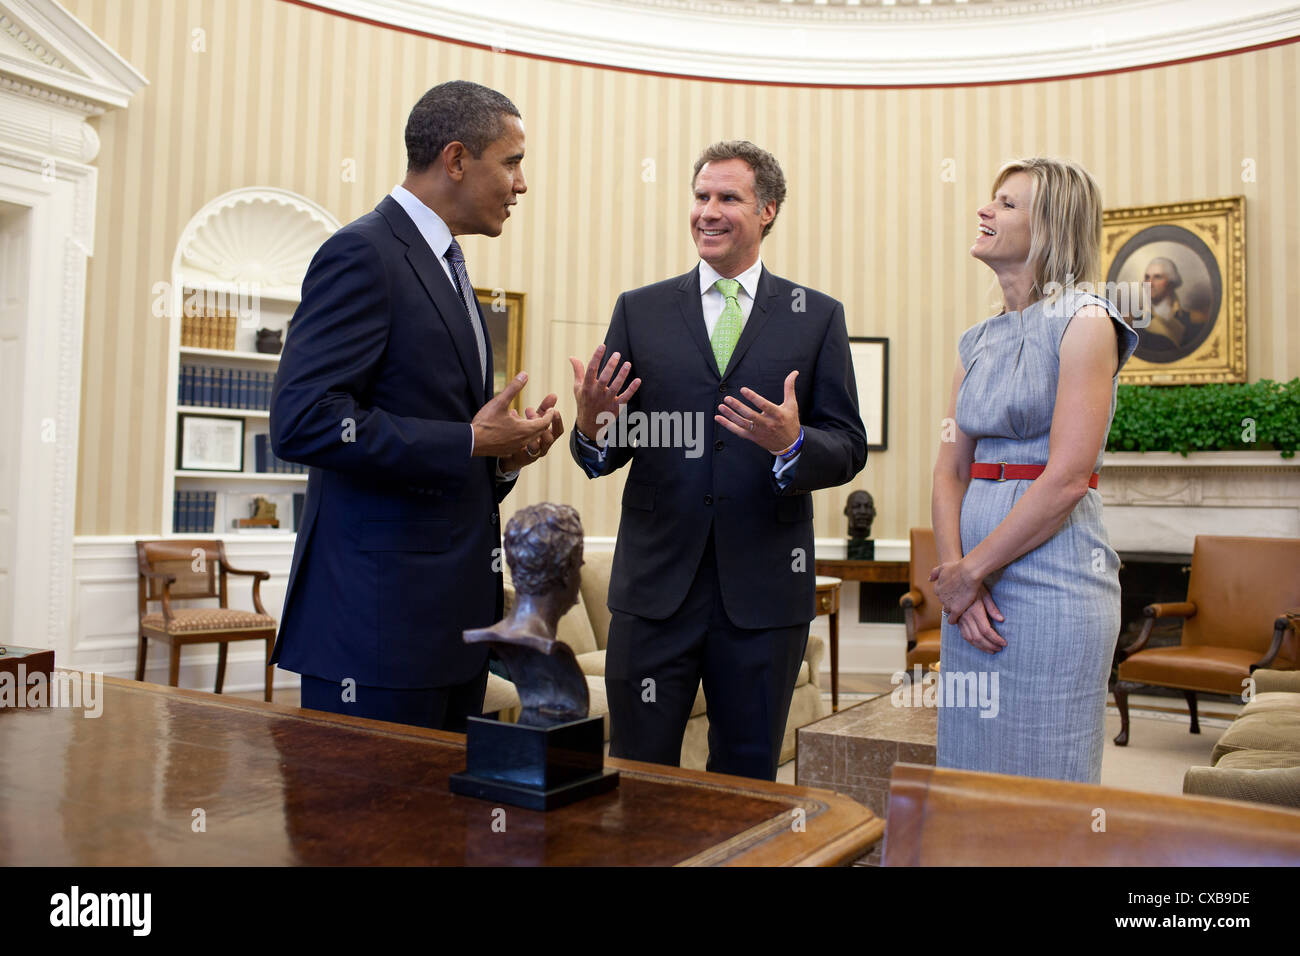 US President Barack Obama meets with Will Ferrell October 21, 2011 in the Oval Office of the White House to congratulate him on recently winning the Mark Twain Prize for American Humor. Ferrell's wife, Viveca Paulin is at right. Stock Photo